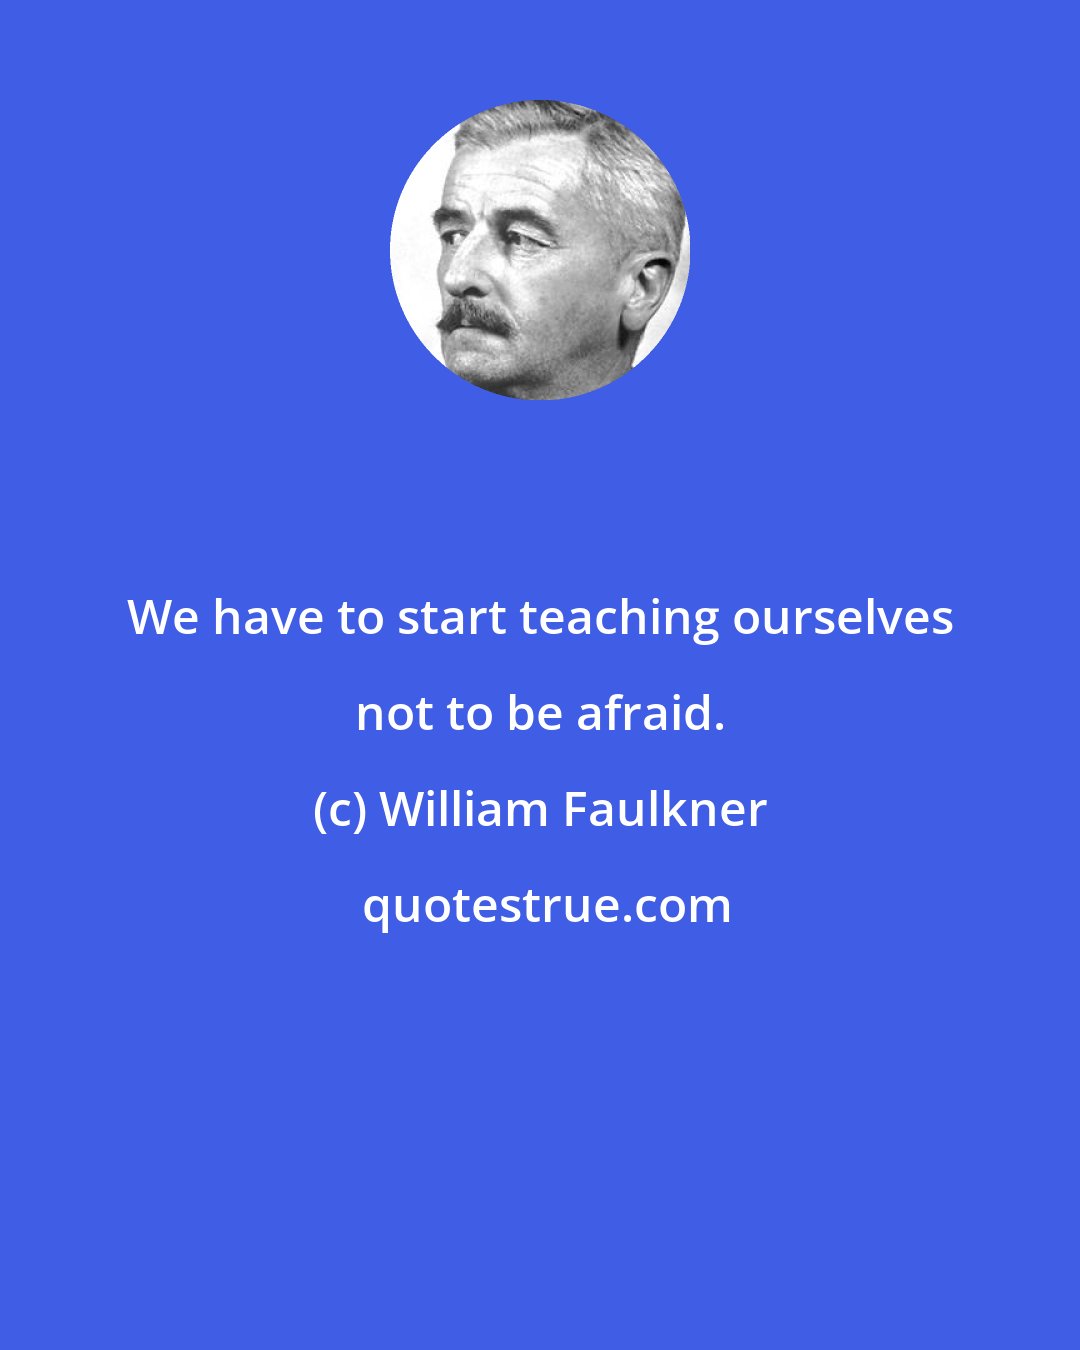 William Faulkner: We have to start teaching ourselves not to be afraid.